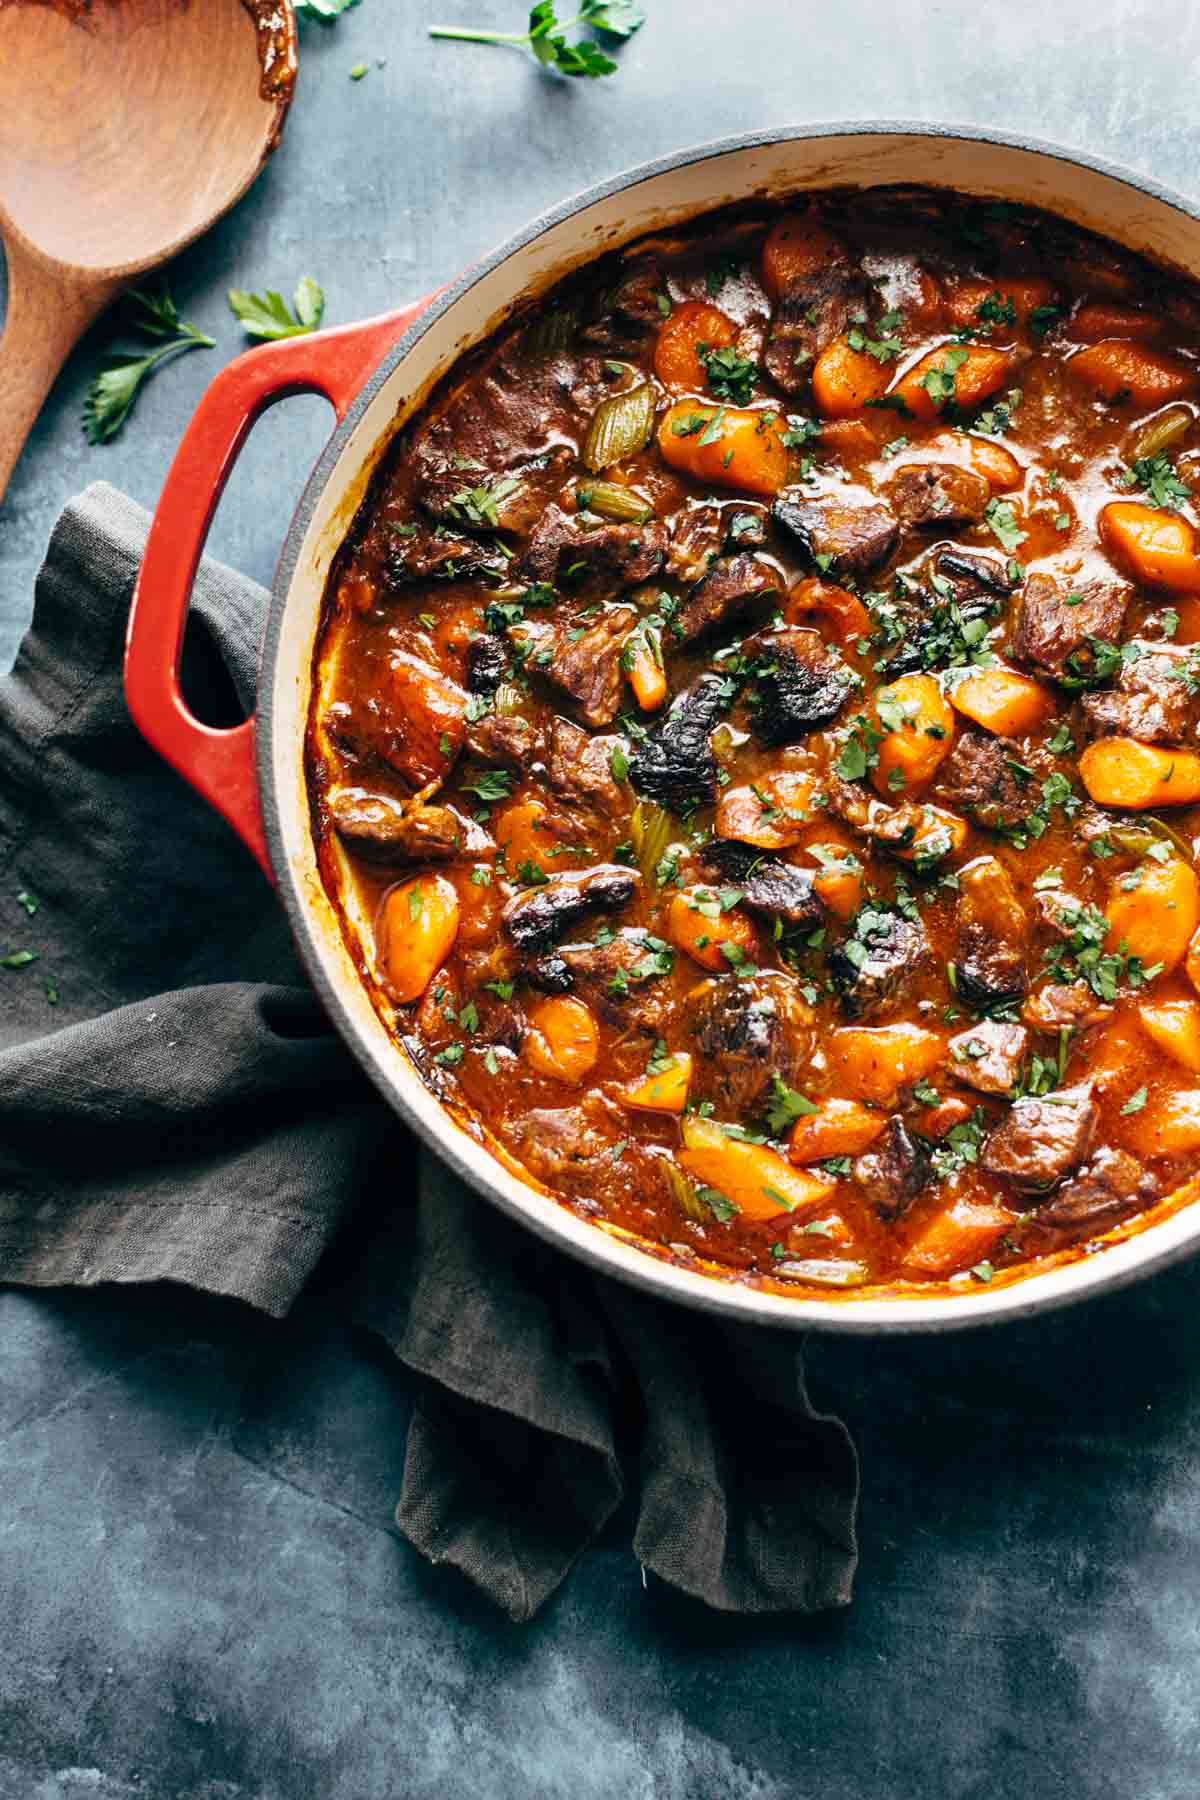 Cool Mom Eats weekly meal plan: Life-changing Instant Pot Beef Stew at Pinch of Yum